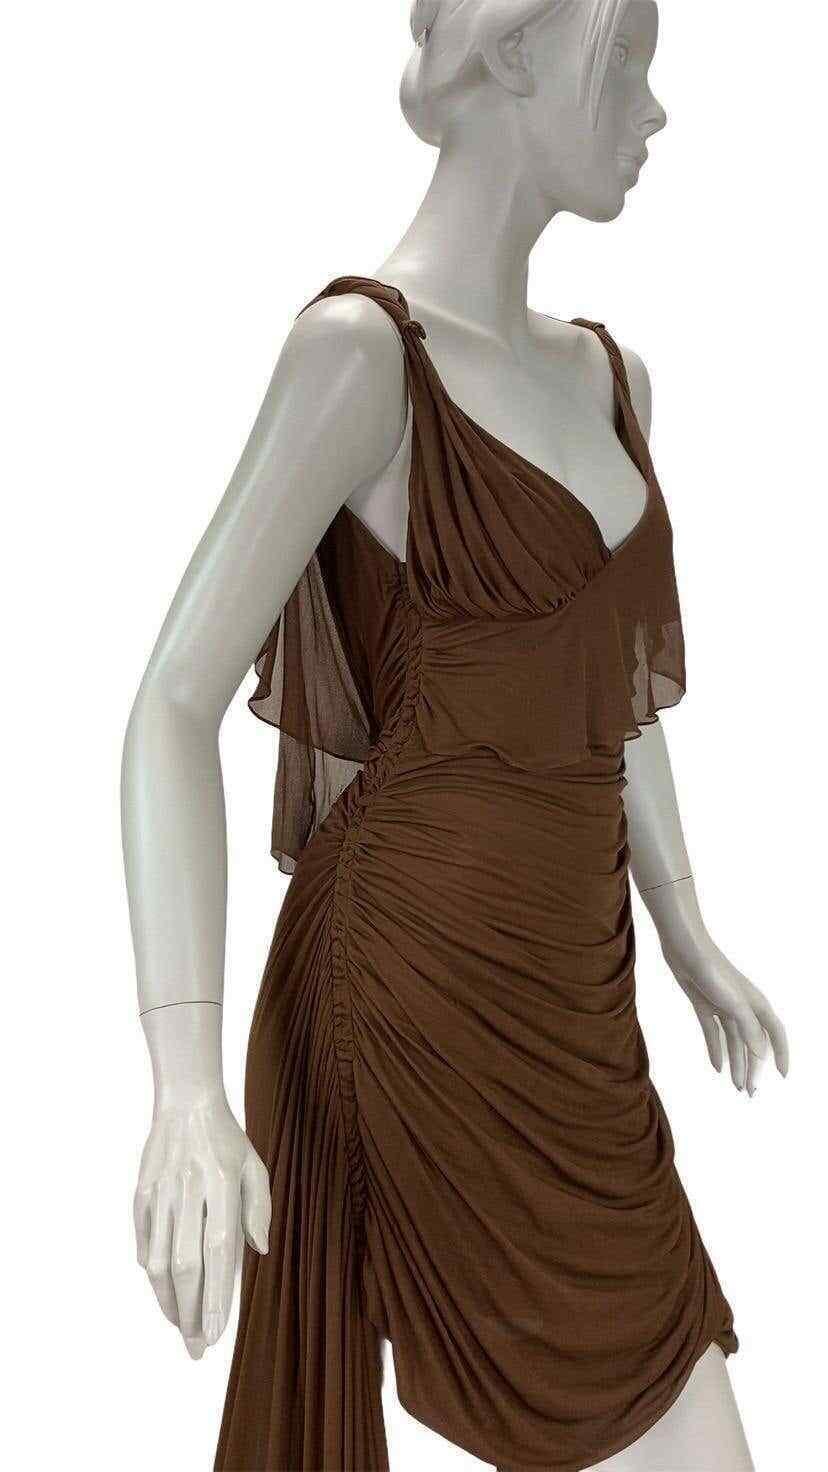 S/S 2003 Vintage Tom Ford For Gucci Greek Goddess Silk Gown as seen in Museum In Excellent Condition For Sale In Montgomery, TX